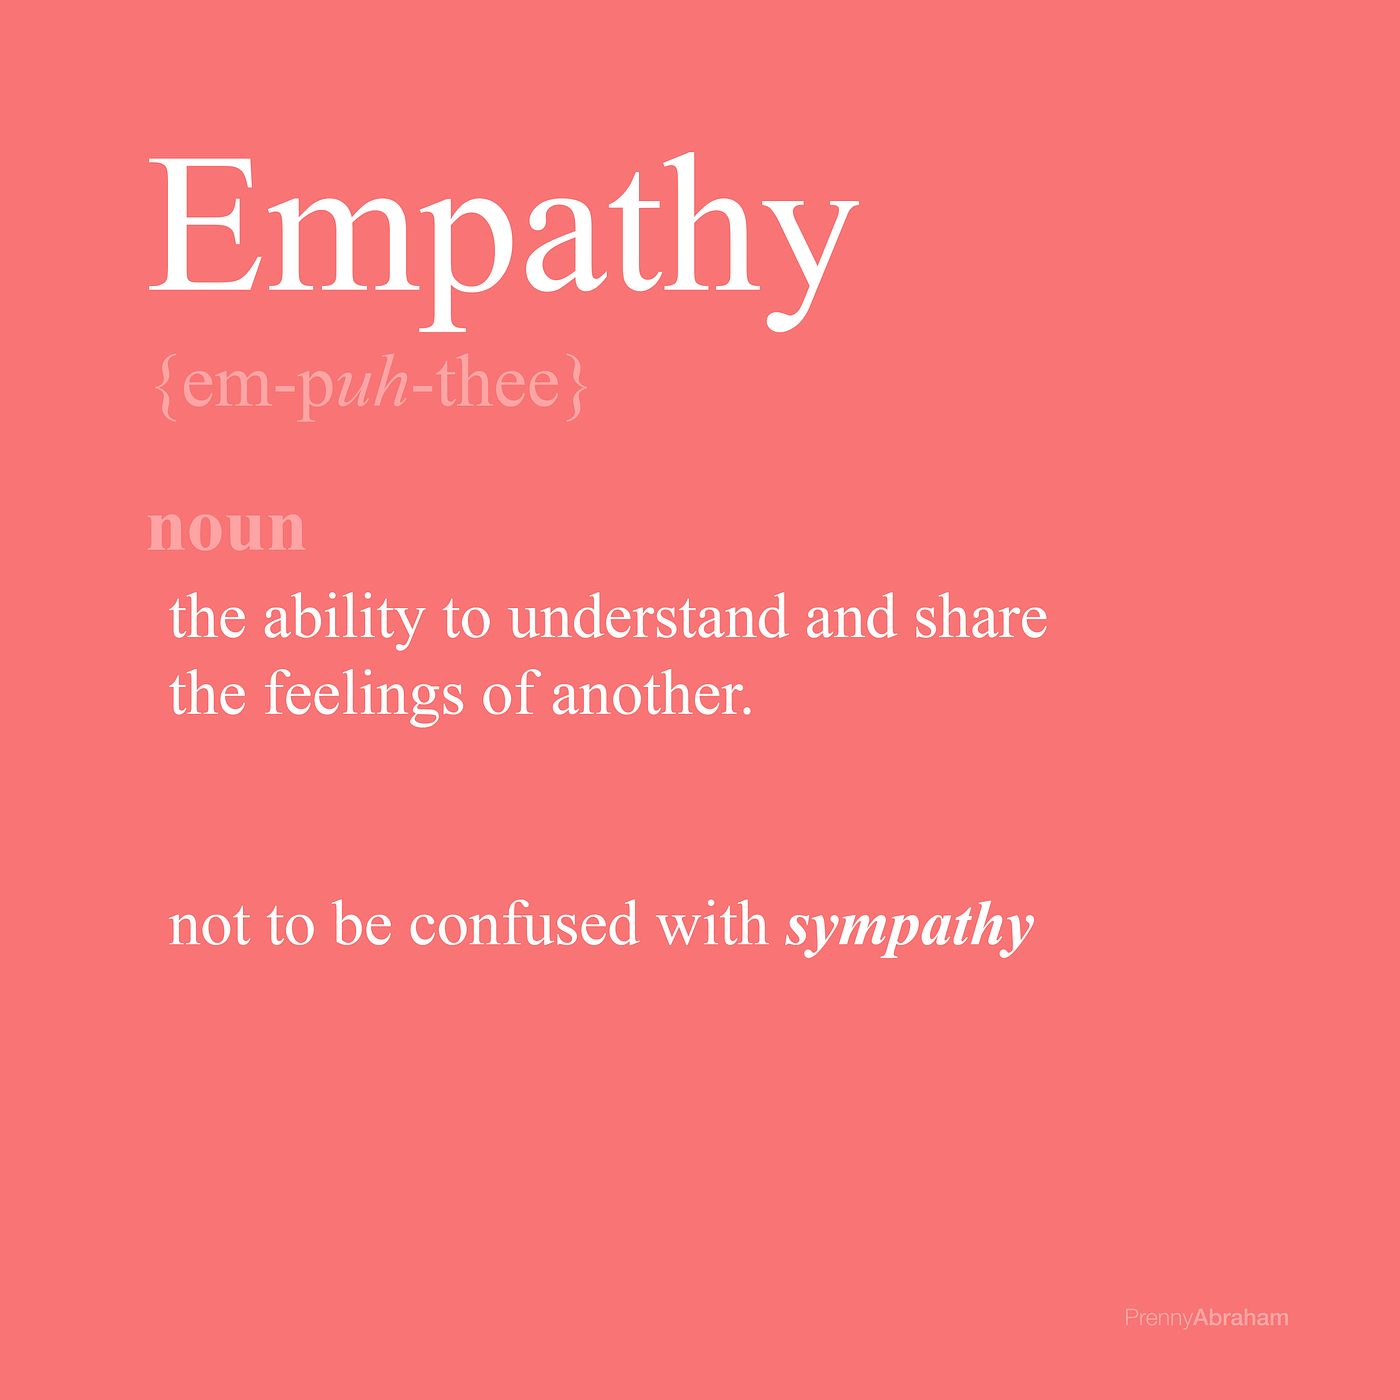 Empathy. Our Skewed Perspective, by P. Abraham